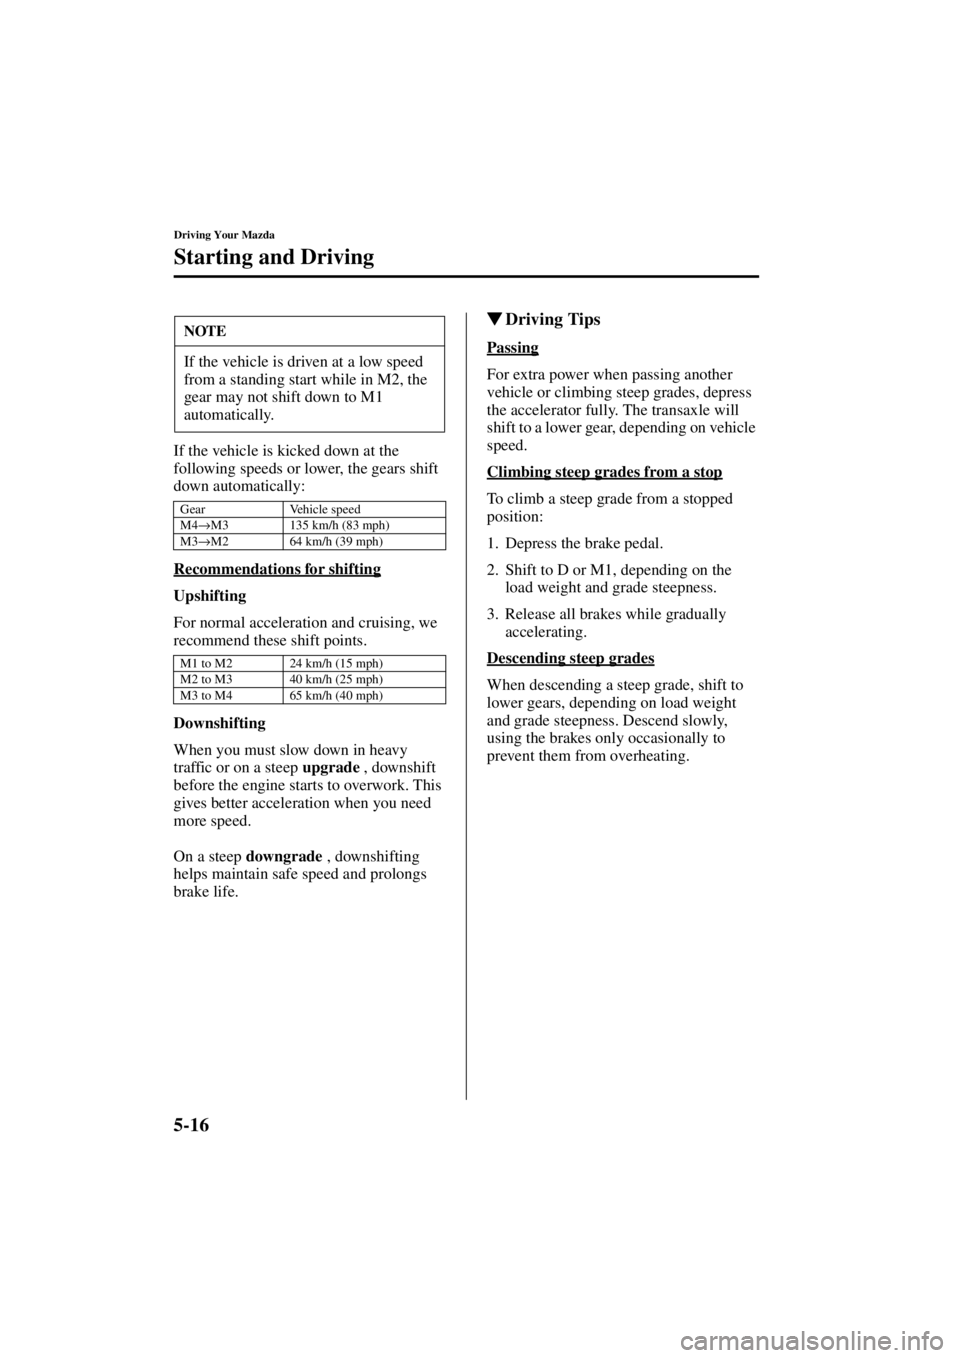 MAZDA MODEL 3 4-DOOR 2004  Owners Manual 5-16
Driving Your Mazda
Starting and Driving
Form No. 8S18-EA-03I
If the vehicle is kicked down at the 
following speeds or lower, the gears shift 
down automatically:
Recommendations for shifting
Ups